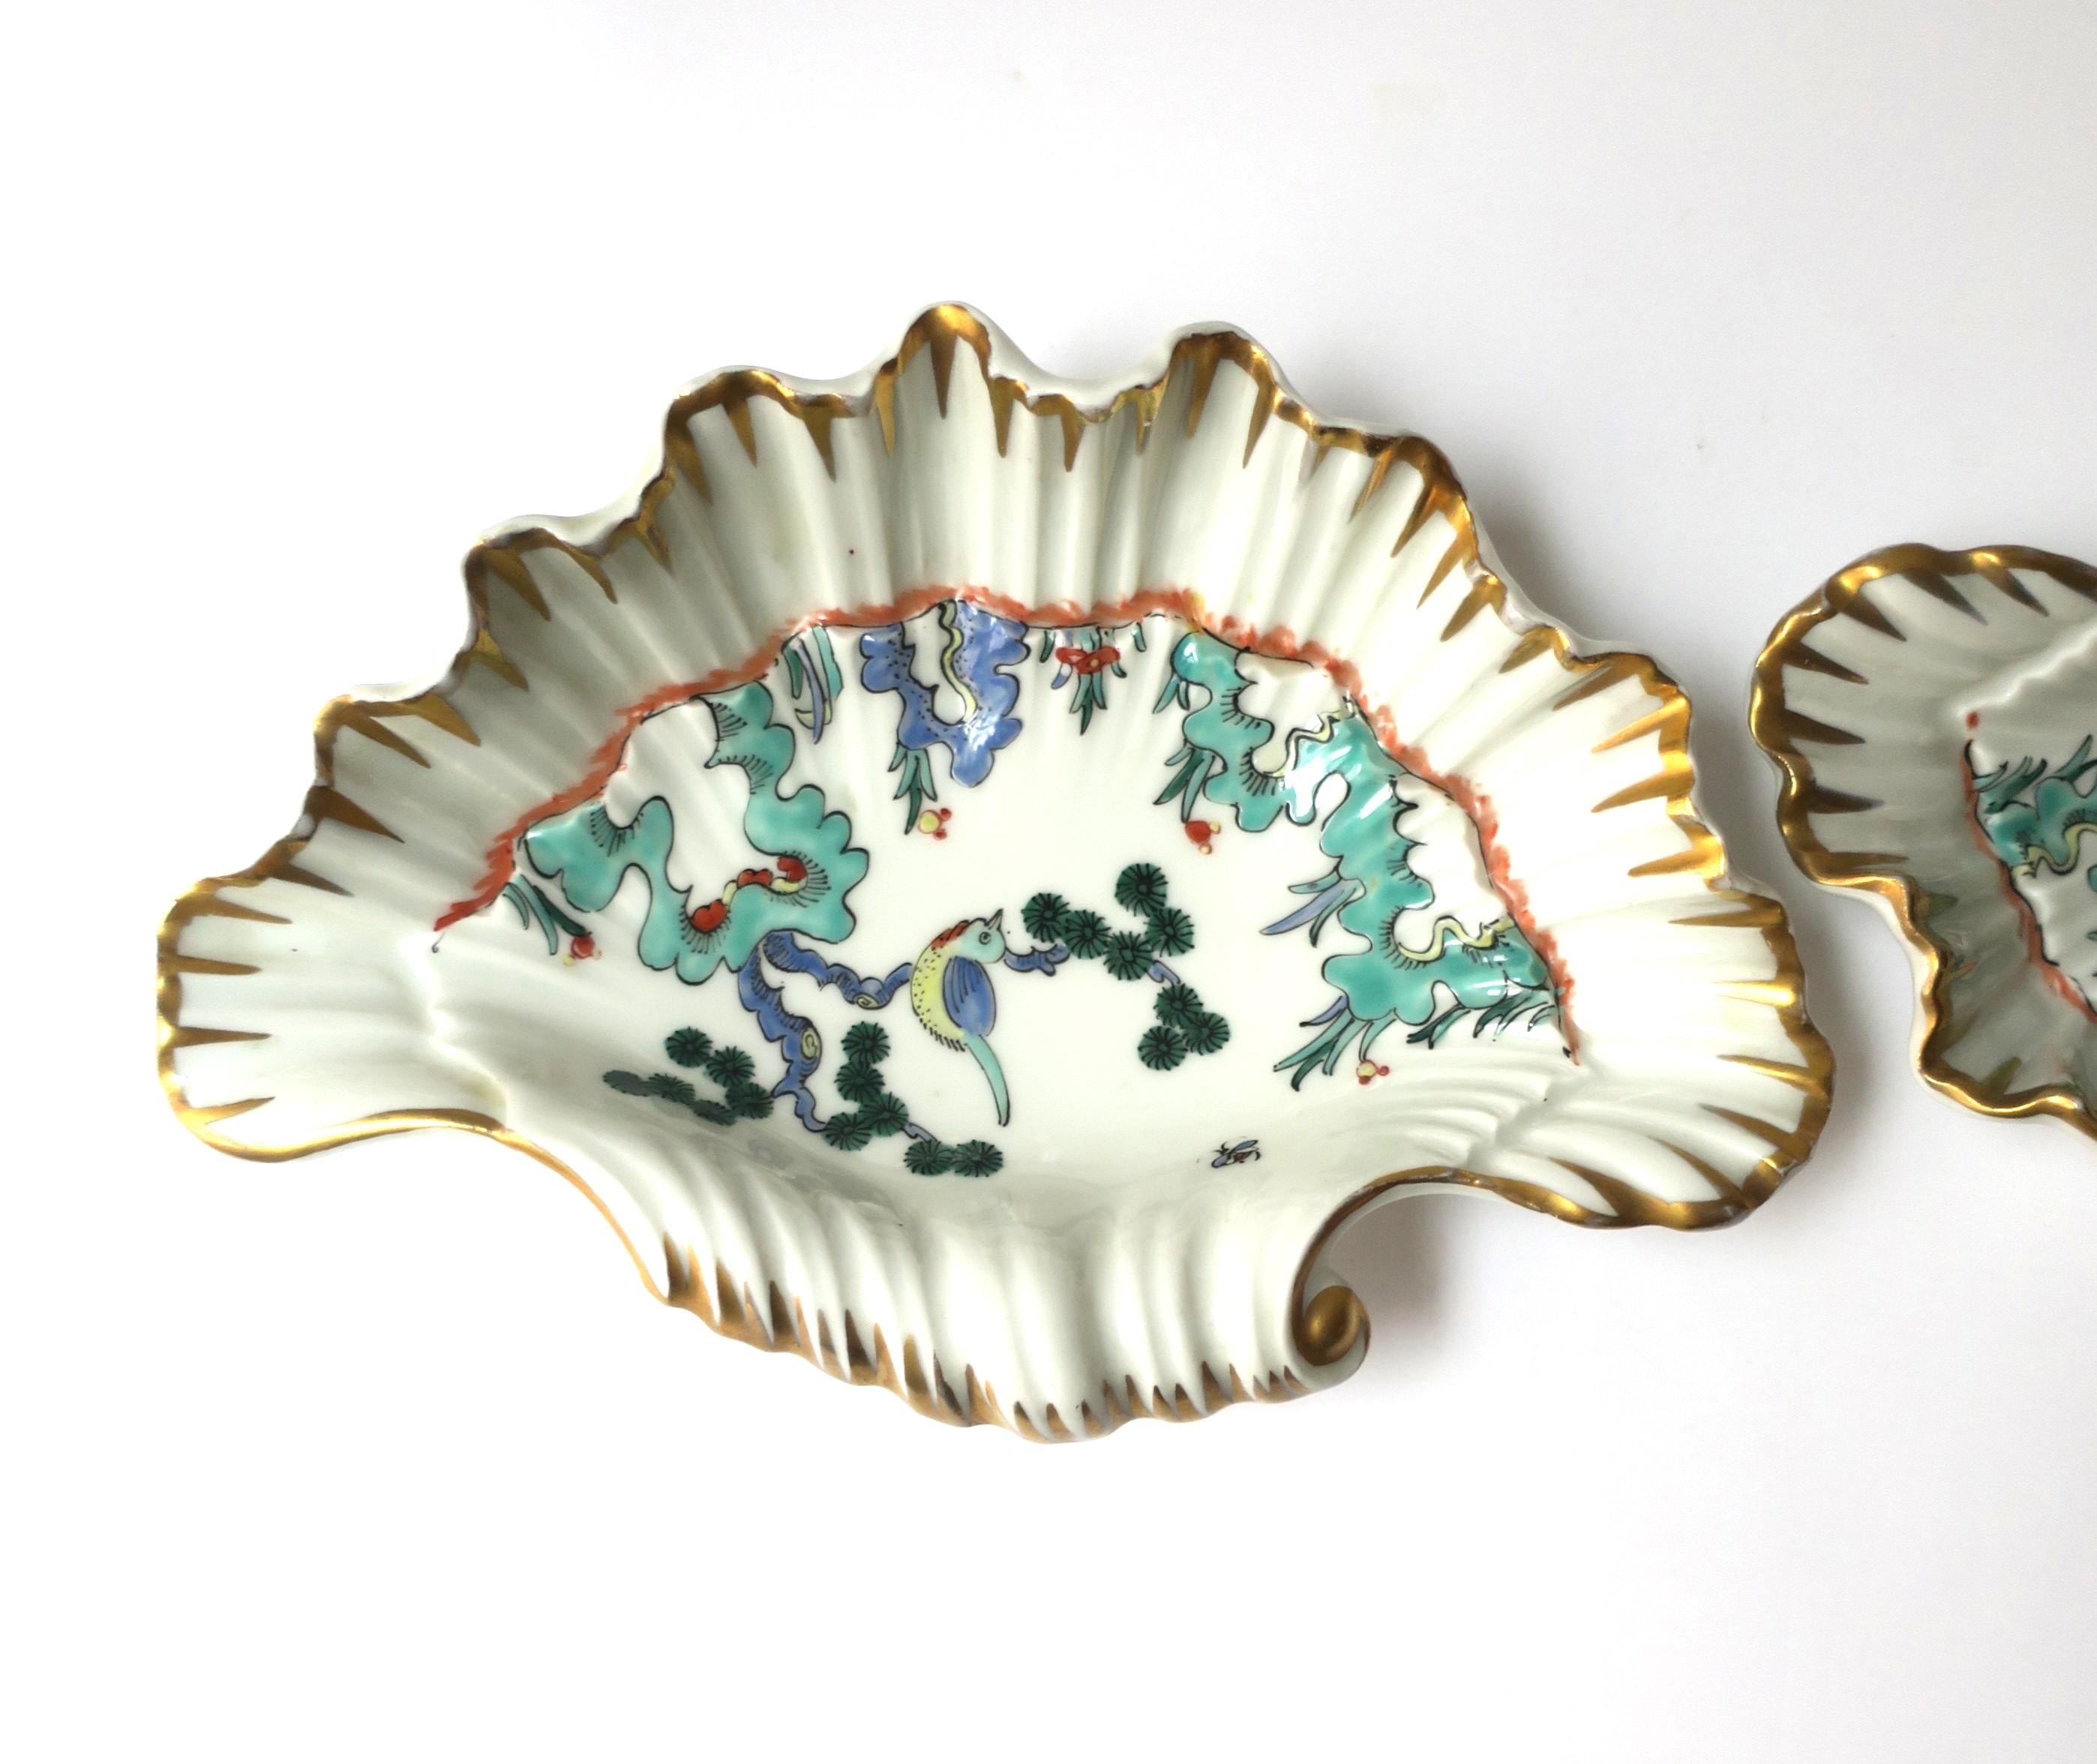 Glazed French Porcelain Seashell Bowls with Bird Design, Pair For Sale